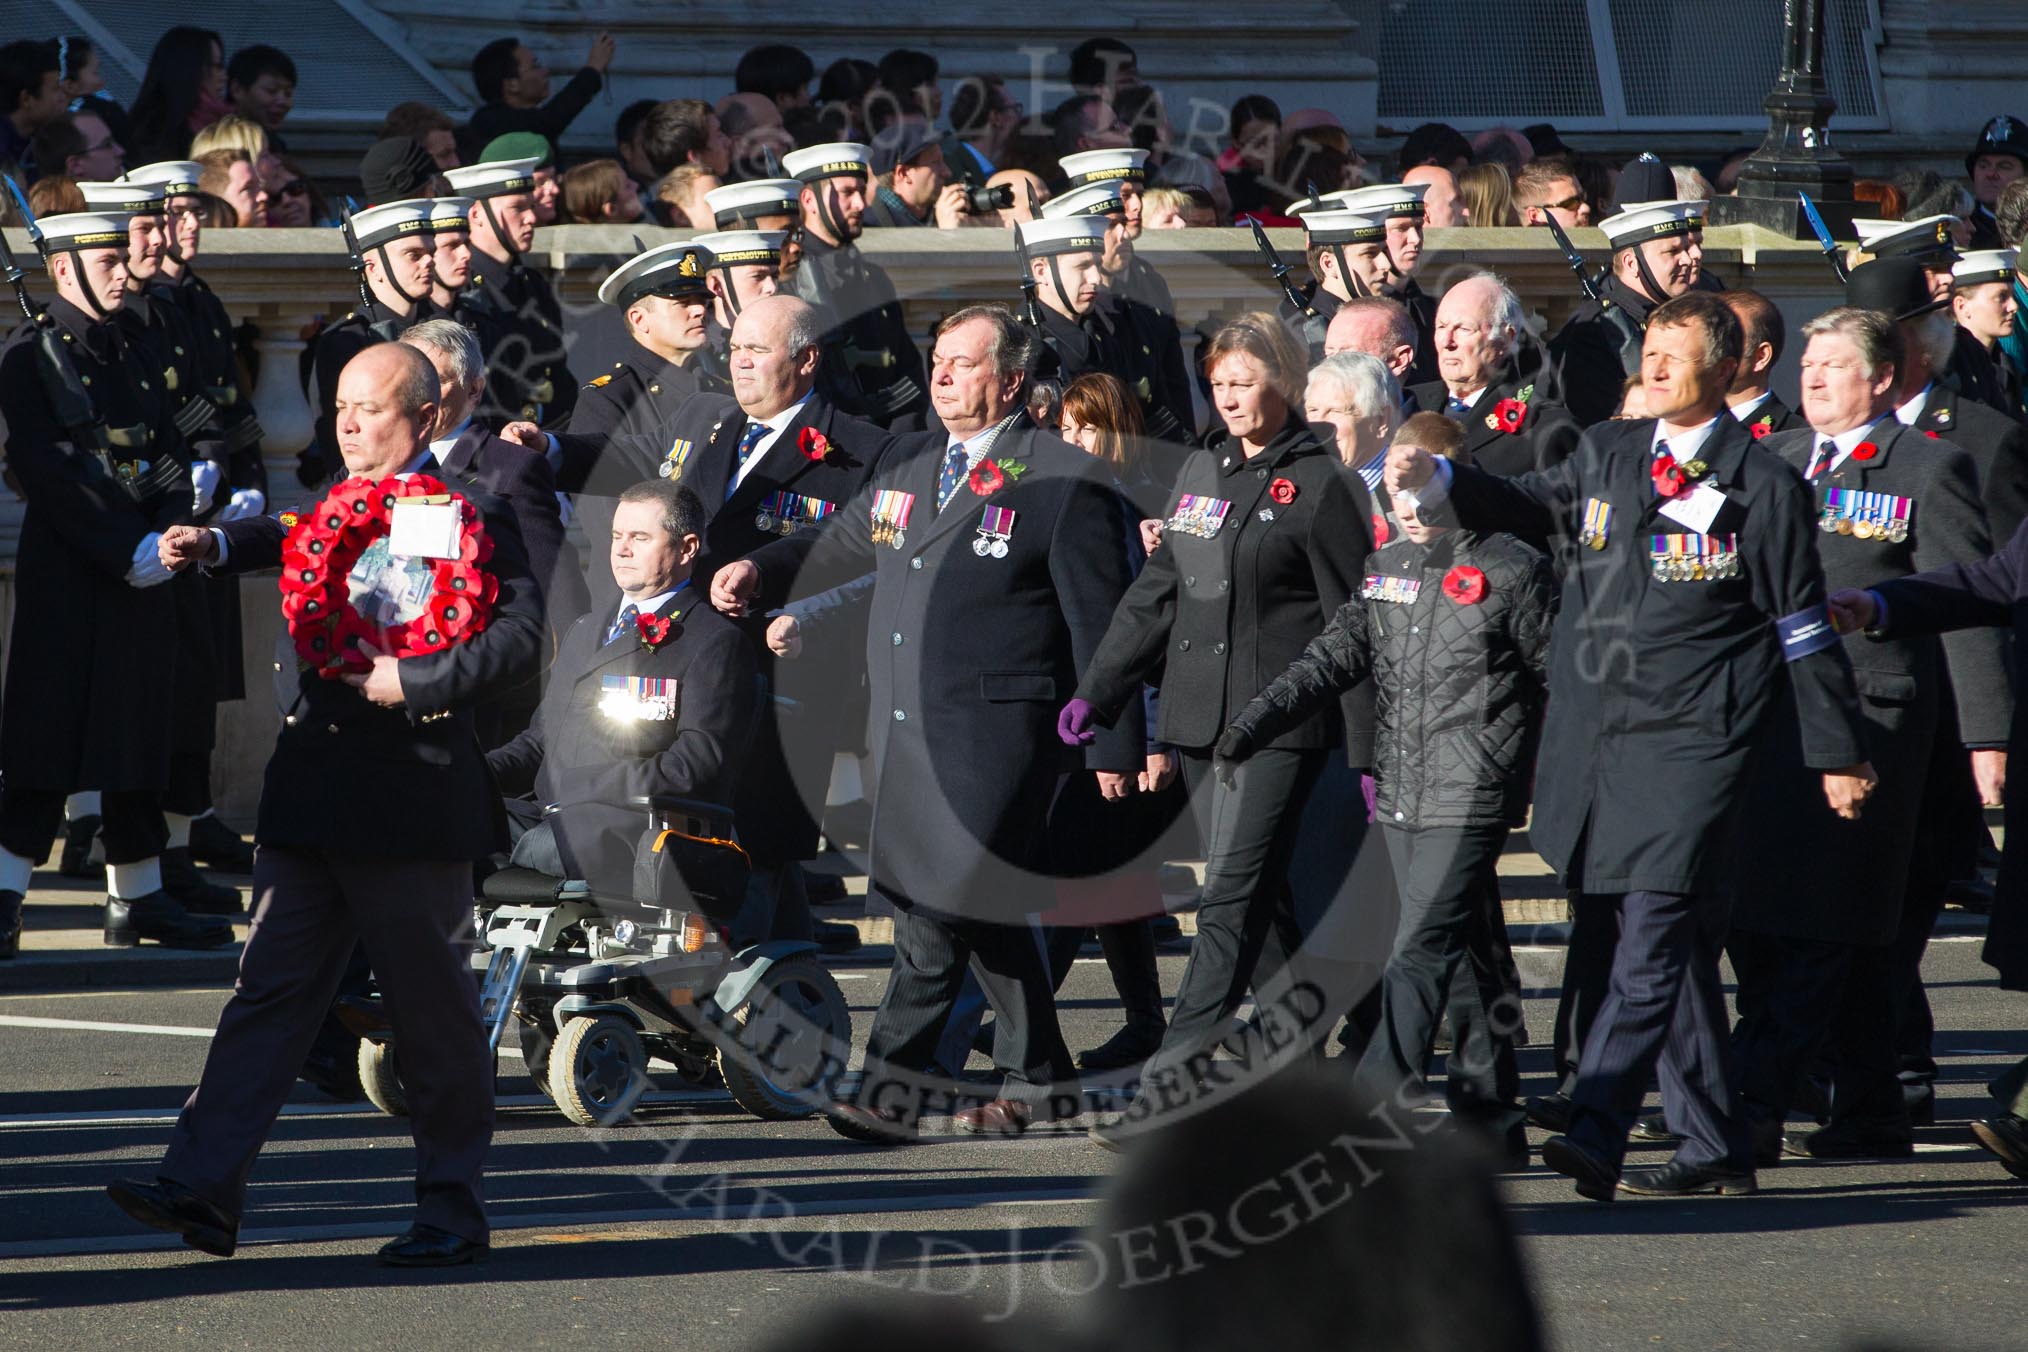 Remembrance Sunday 2012 Cenotaph March Past: Group B18 - Association of Ammunition Technicians..
Whitehall, Cenotaph,
London SW1,

United Kingdom,
on 11 November 2012 at 11:57, image #919